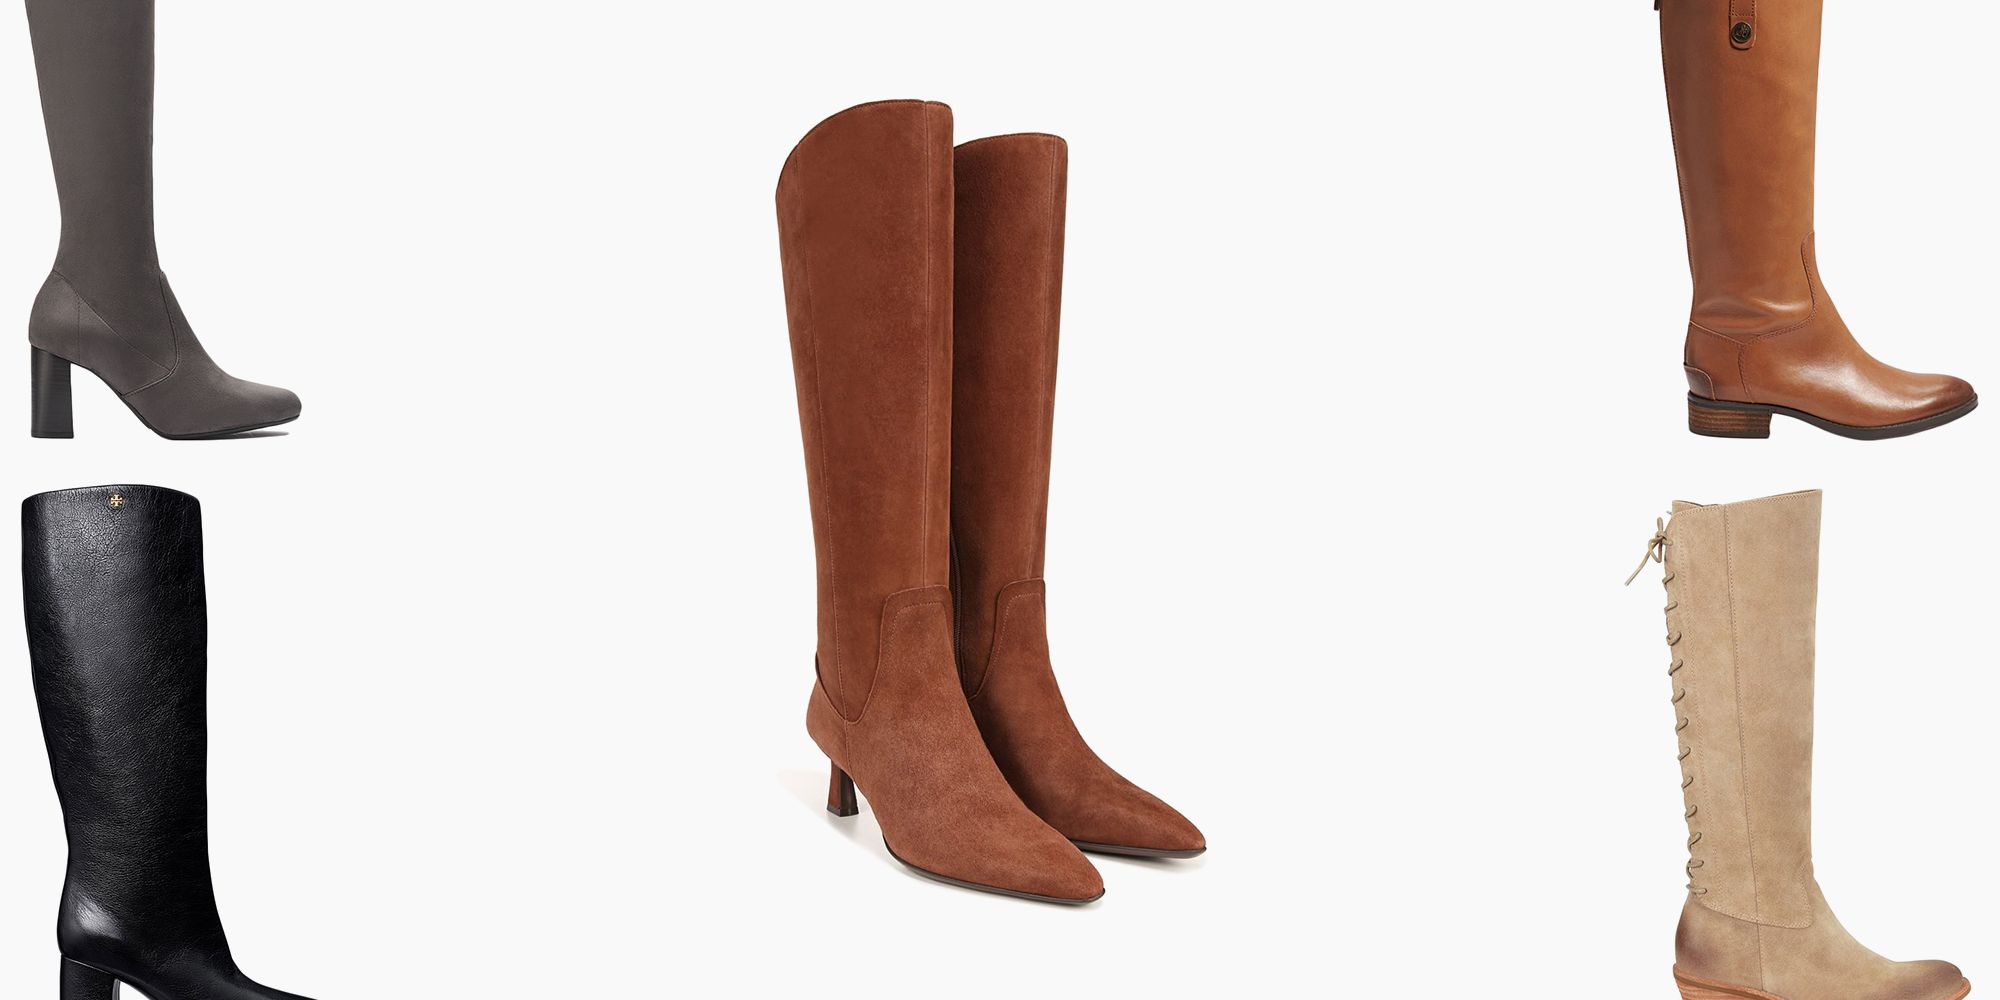 Wide Calf Boots, Boots For Wide Calves